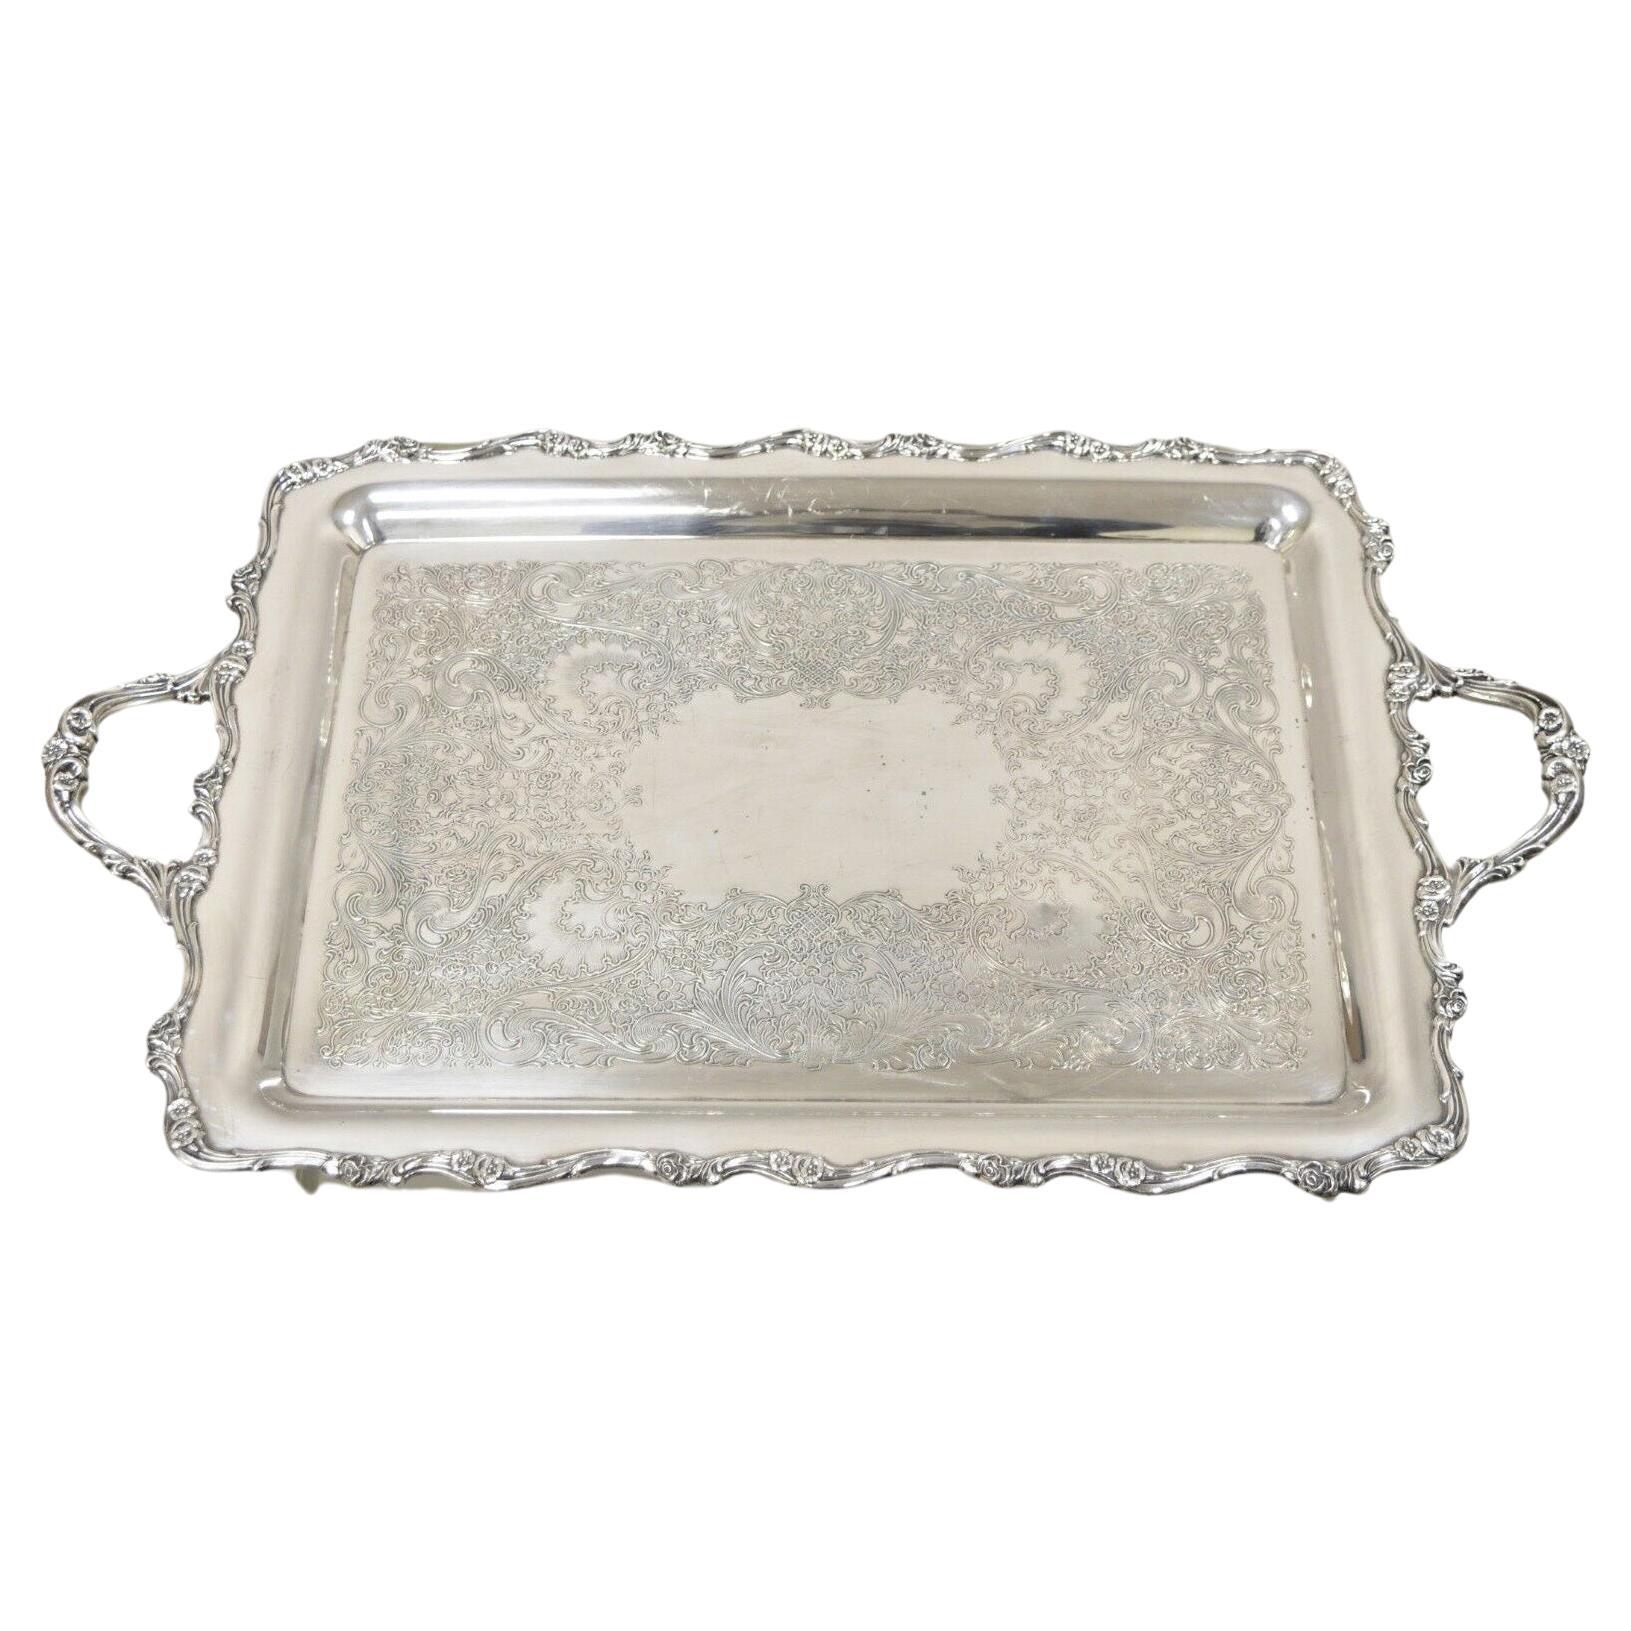 Antique Wilcox International Silver Co. American Rose 7391 Serving Platter Tray